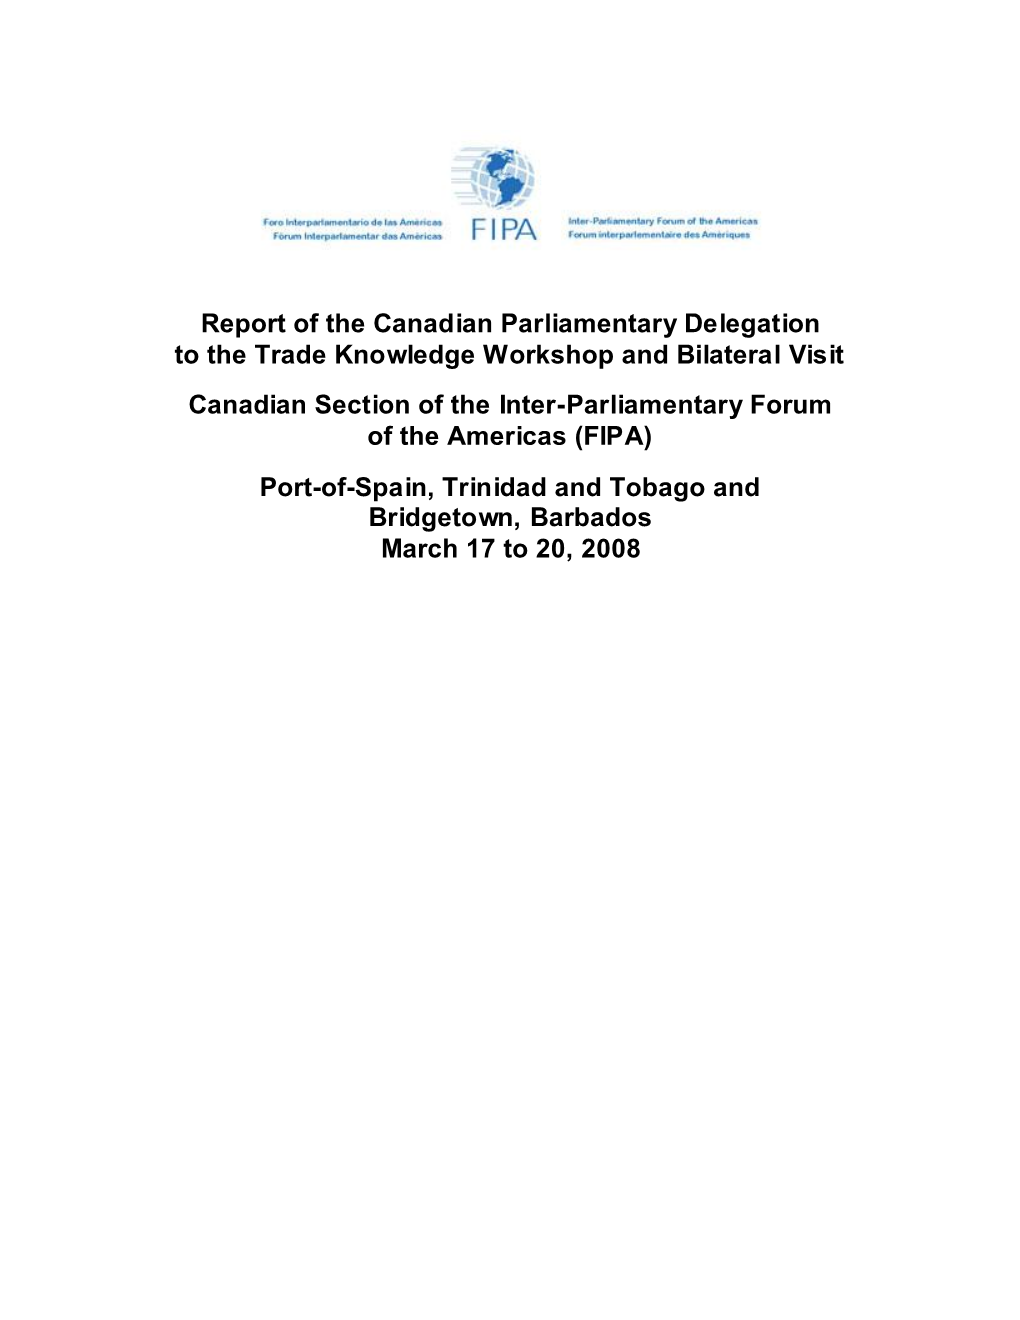 Report of the Canadian Parliamentary Delegation to the Trade Knowledge Workshop and Bilateral Visit Canadian Section of The